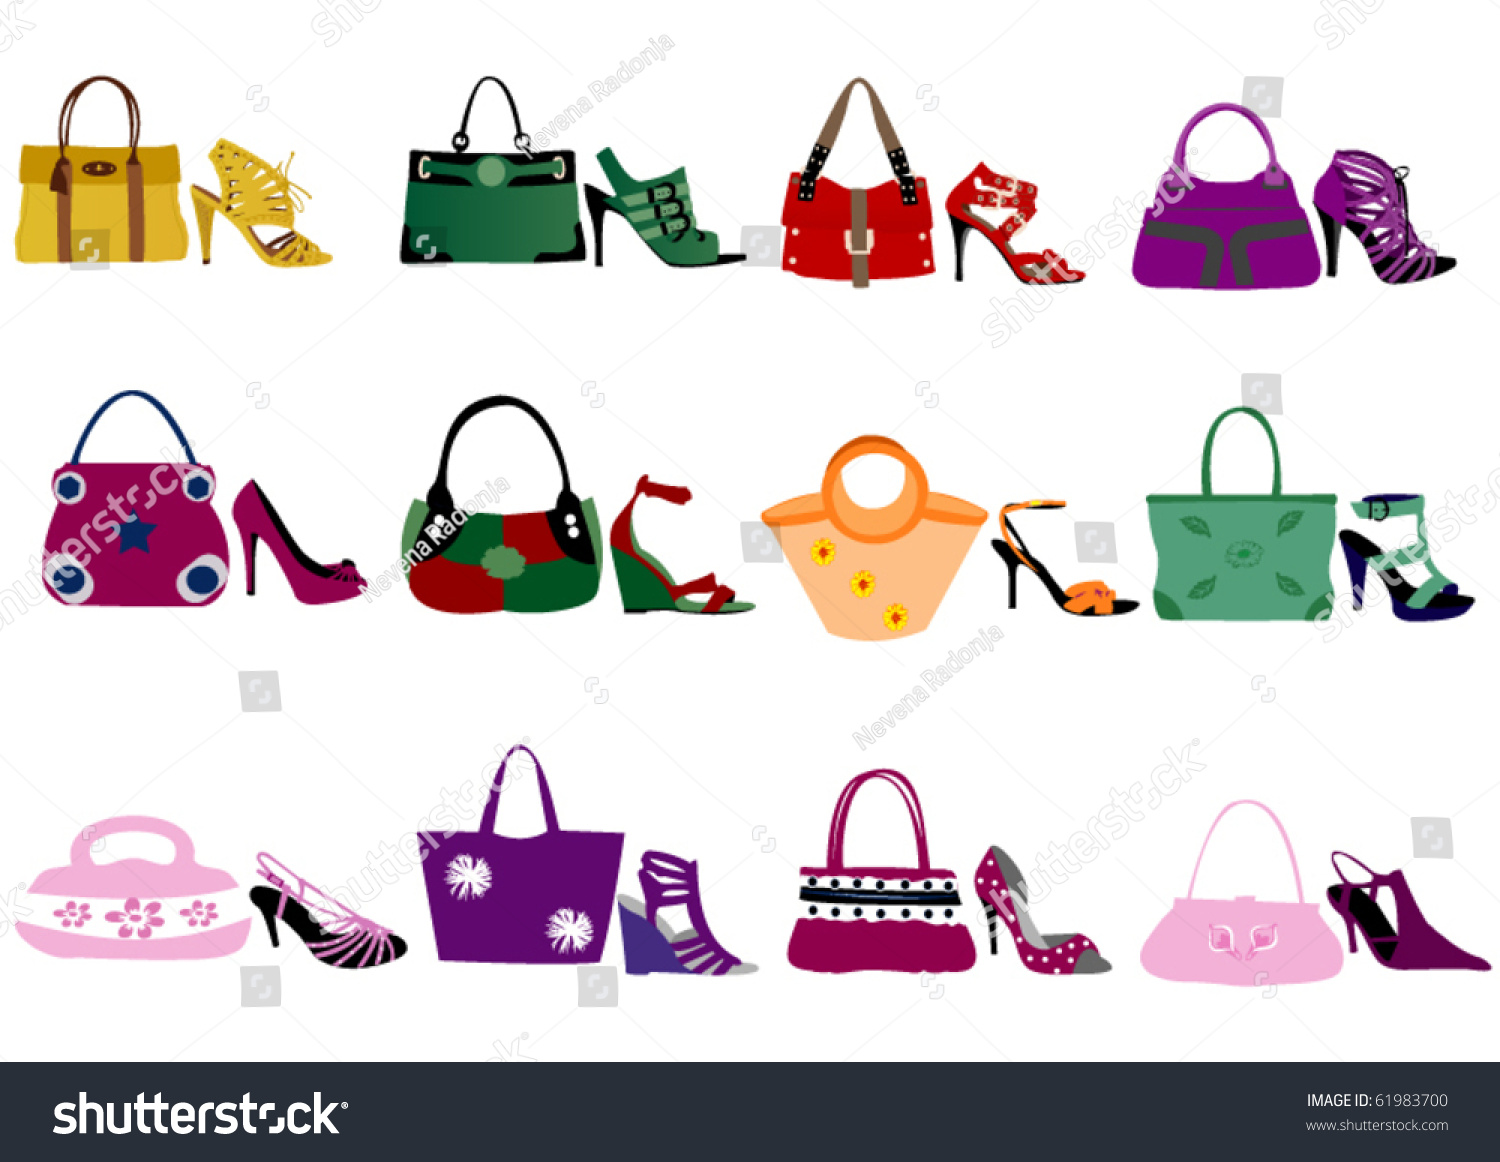 Fashion Shoes And Bags Stock Vector Illustration 61983700 : Shutterstock